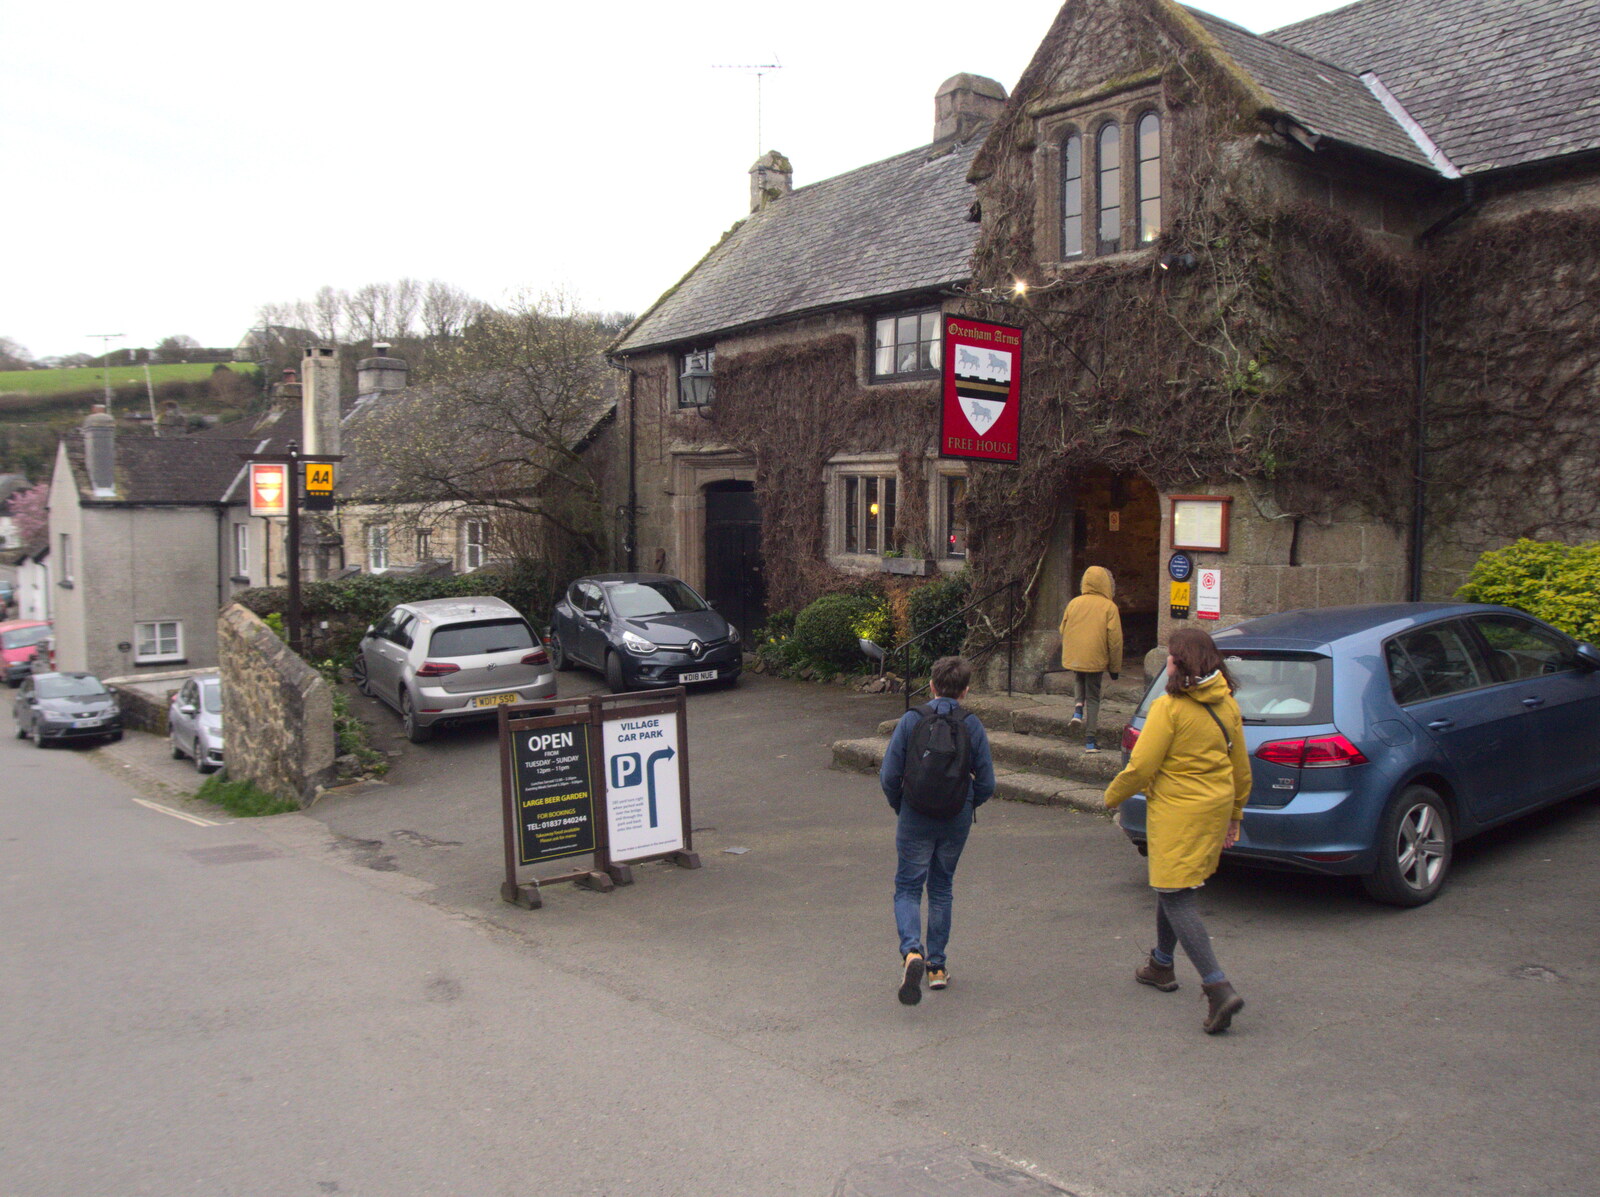 We head into the 12th-century Oxenham Arms from Chilli Farms, Okehampton and the Oxenham Arms, South Zeal, Devon - 10th April 2023